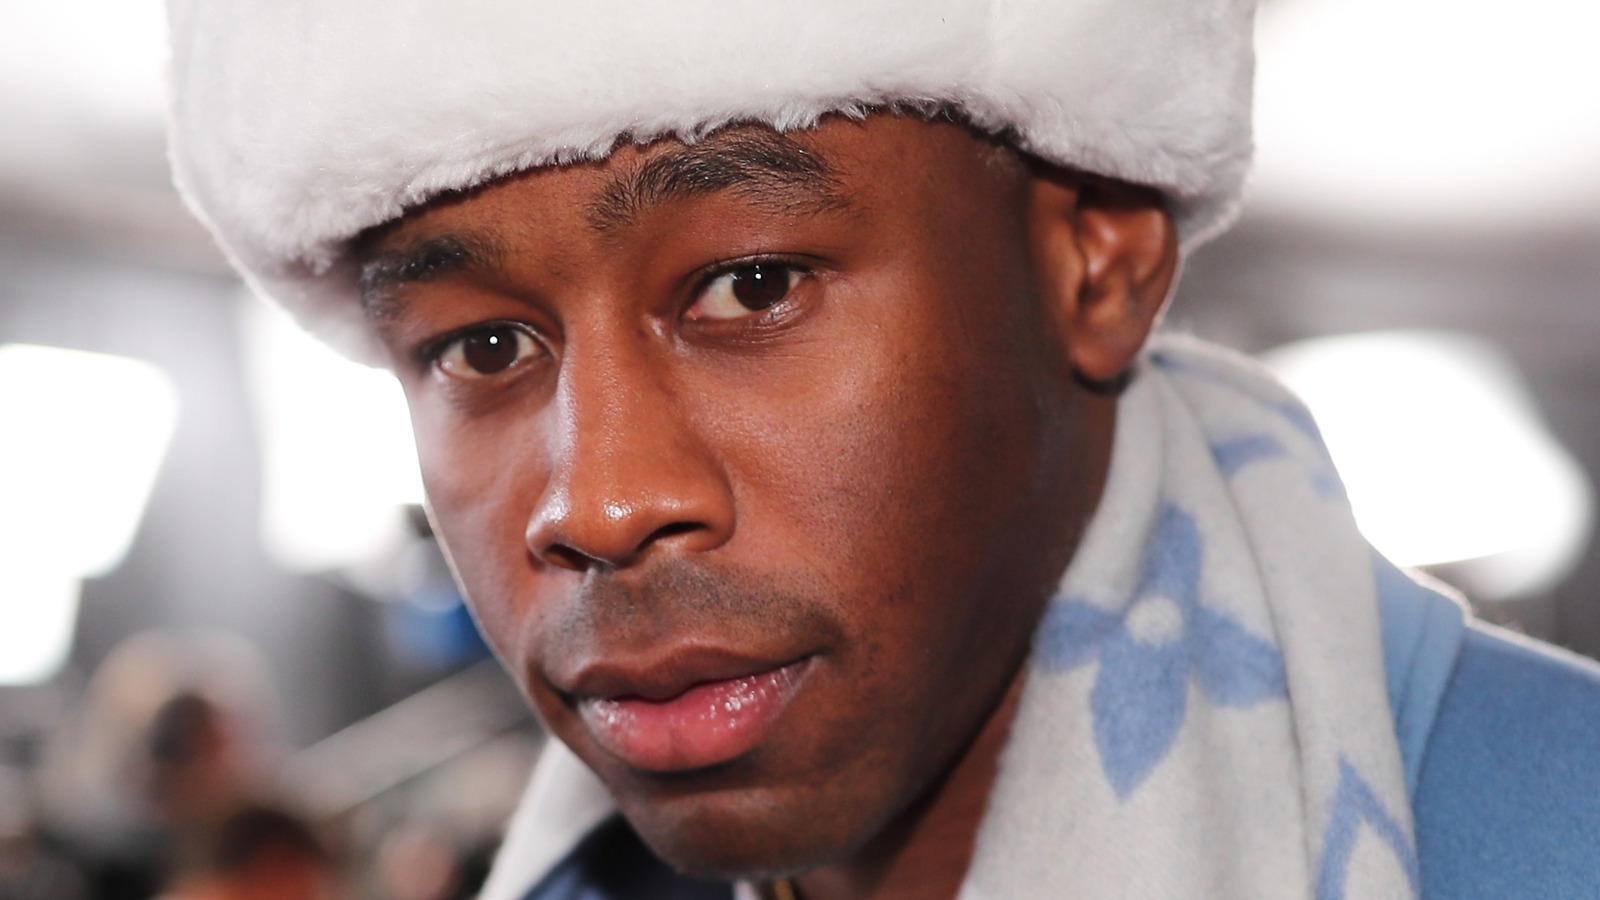 The Real Reason Tyler The Creator Apologized To Selena Gomez Over Justin Bieber